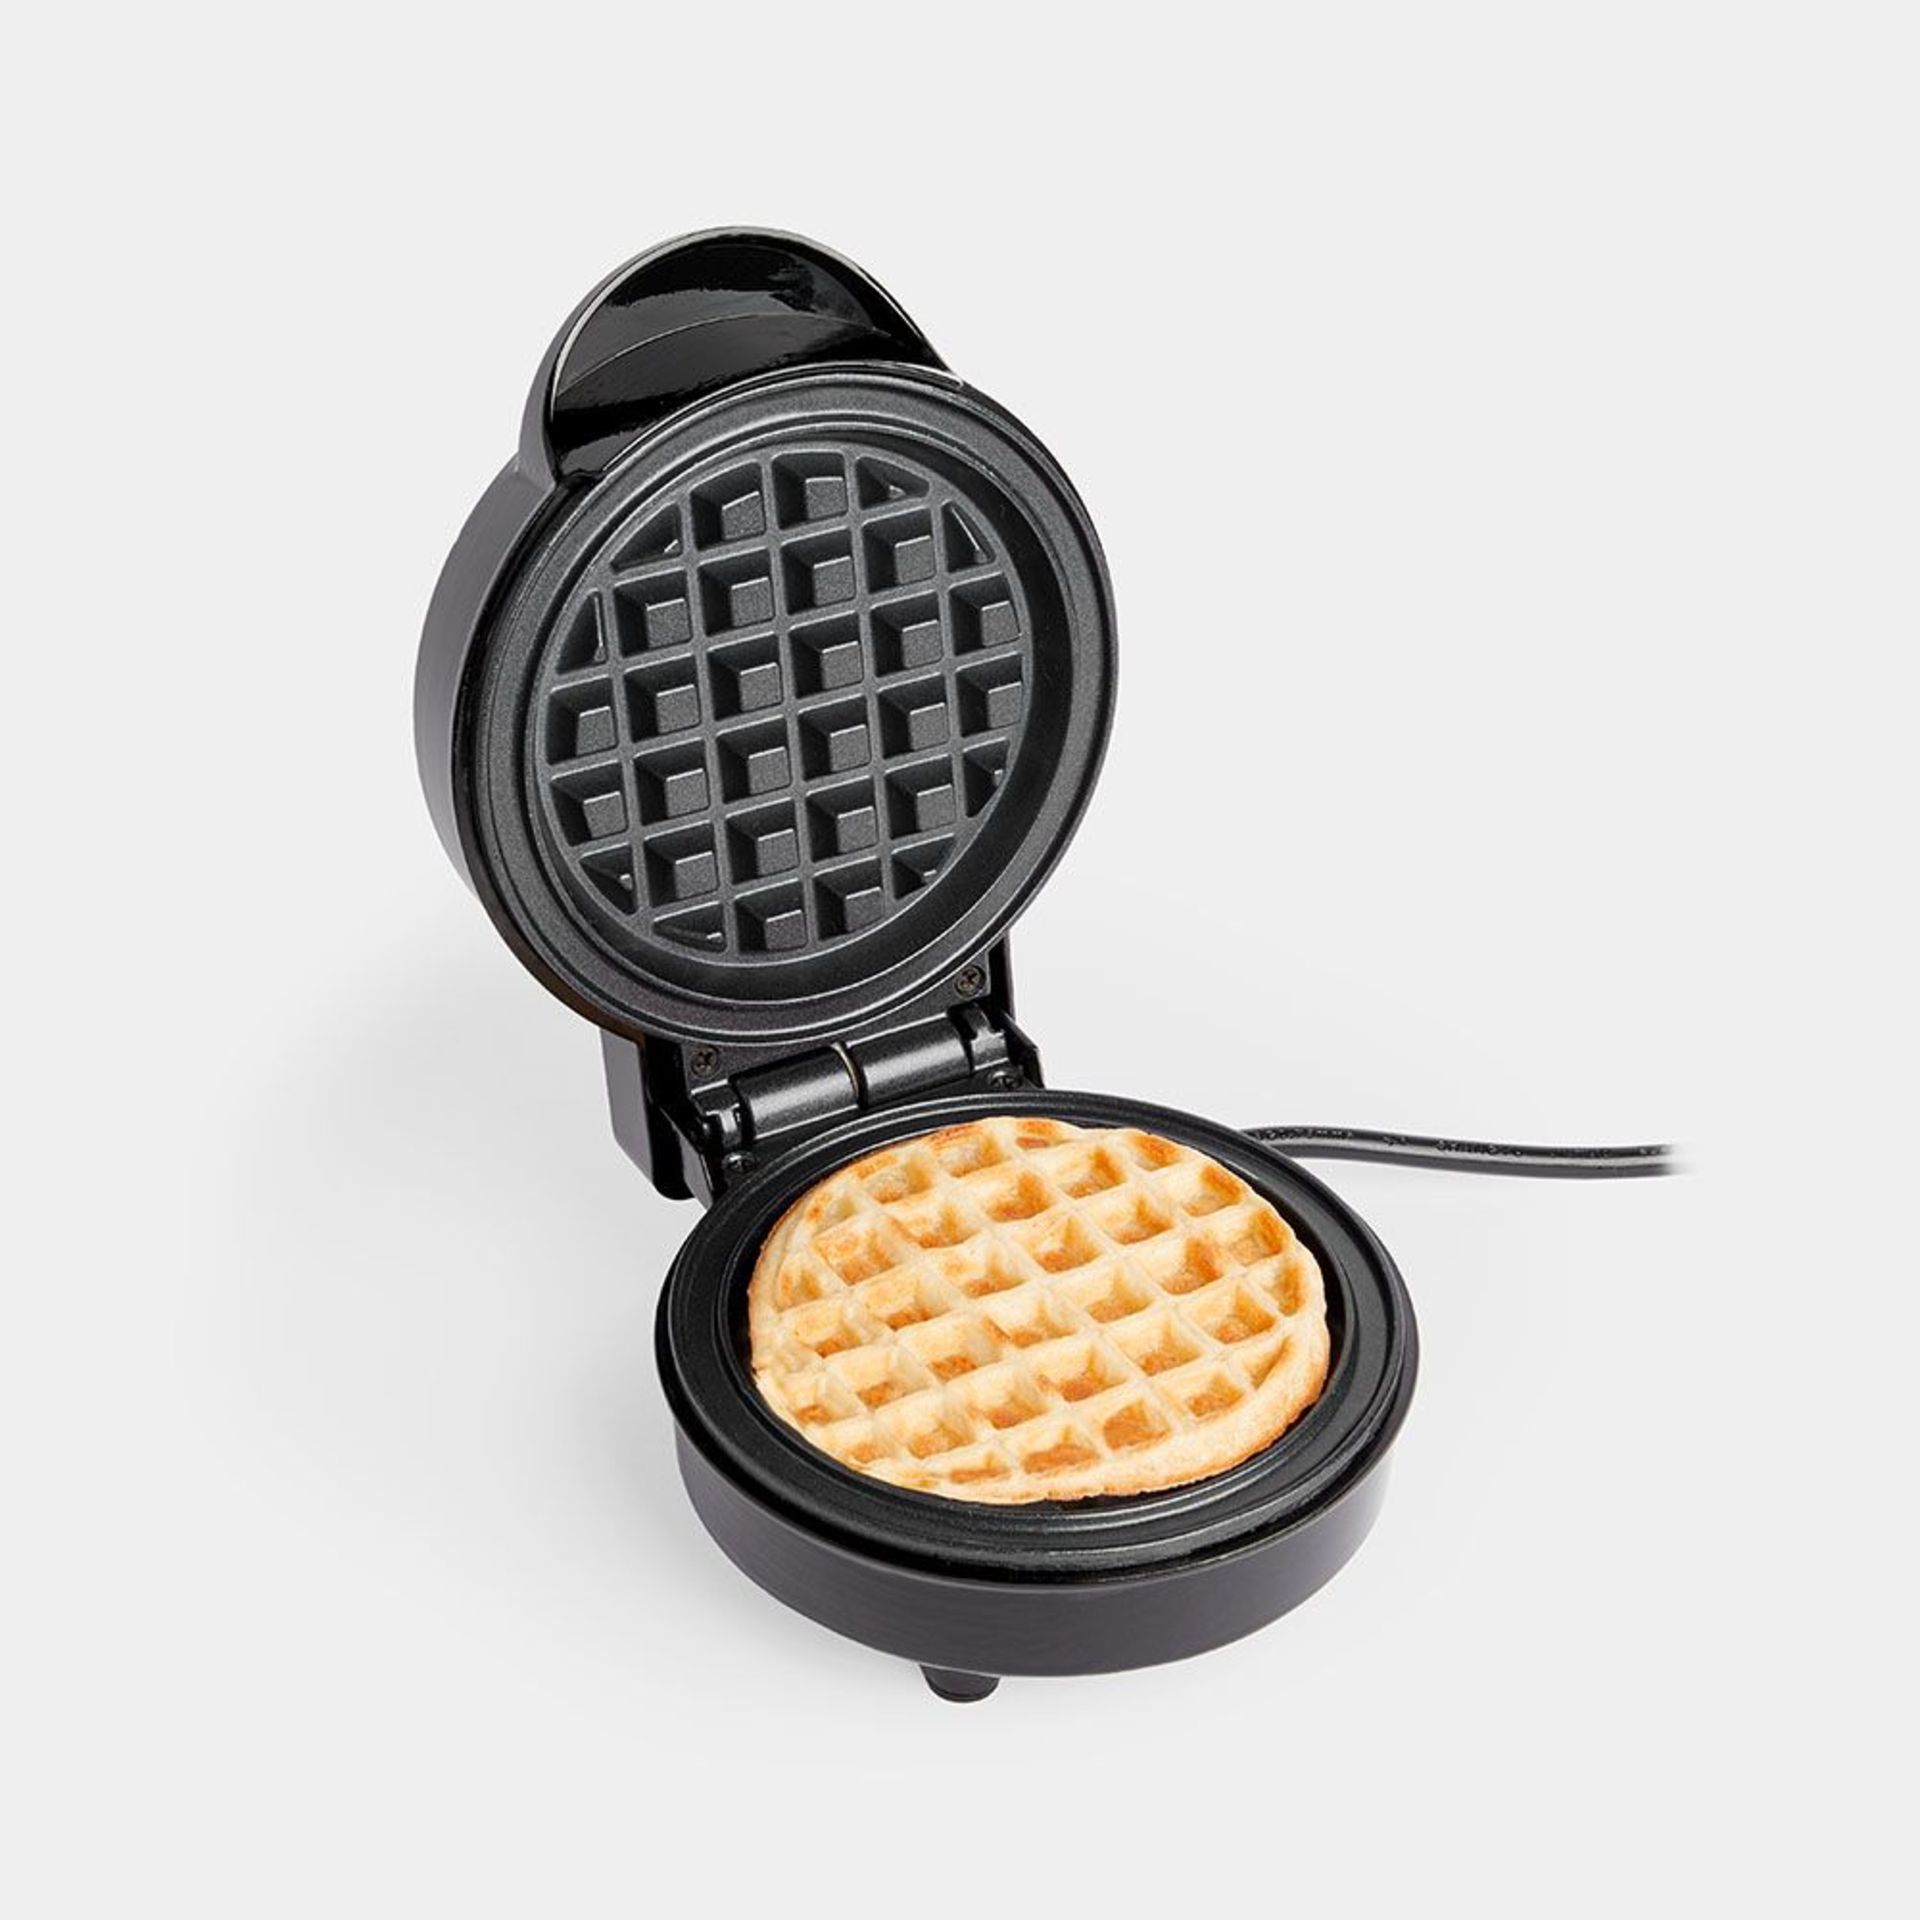 600w Mini Waffle Maker. With a max temperature of 155°C you can cook delicious waffles in an average